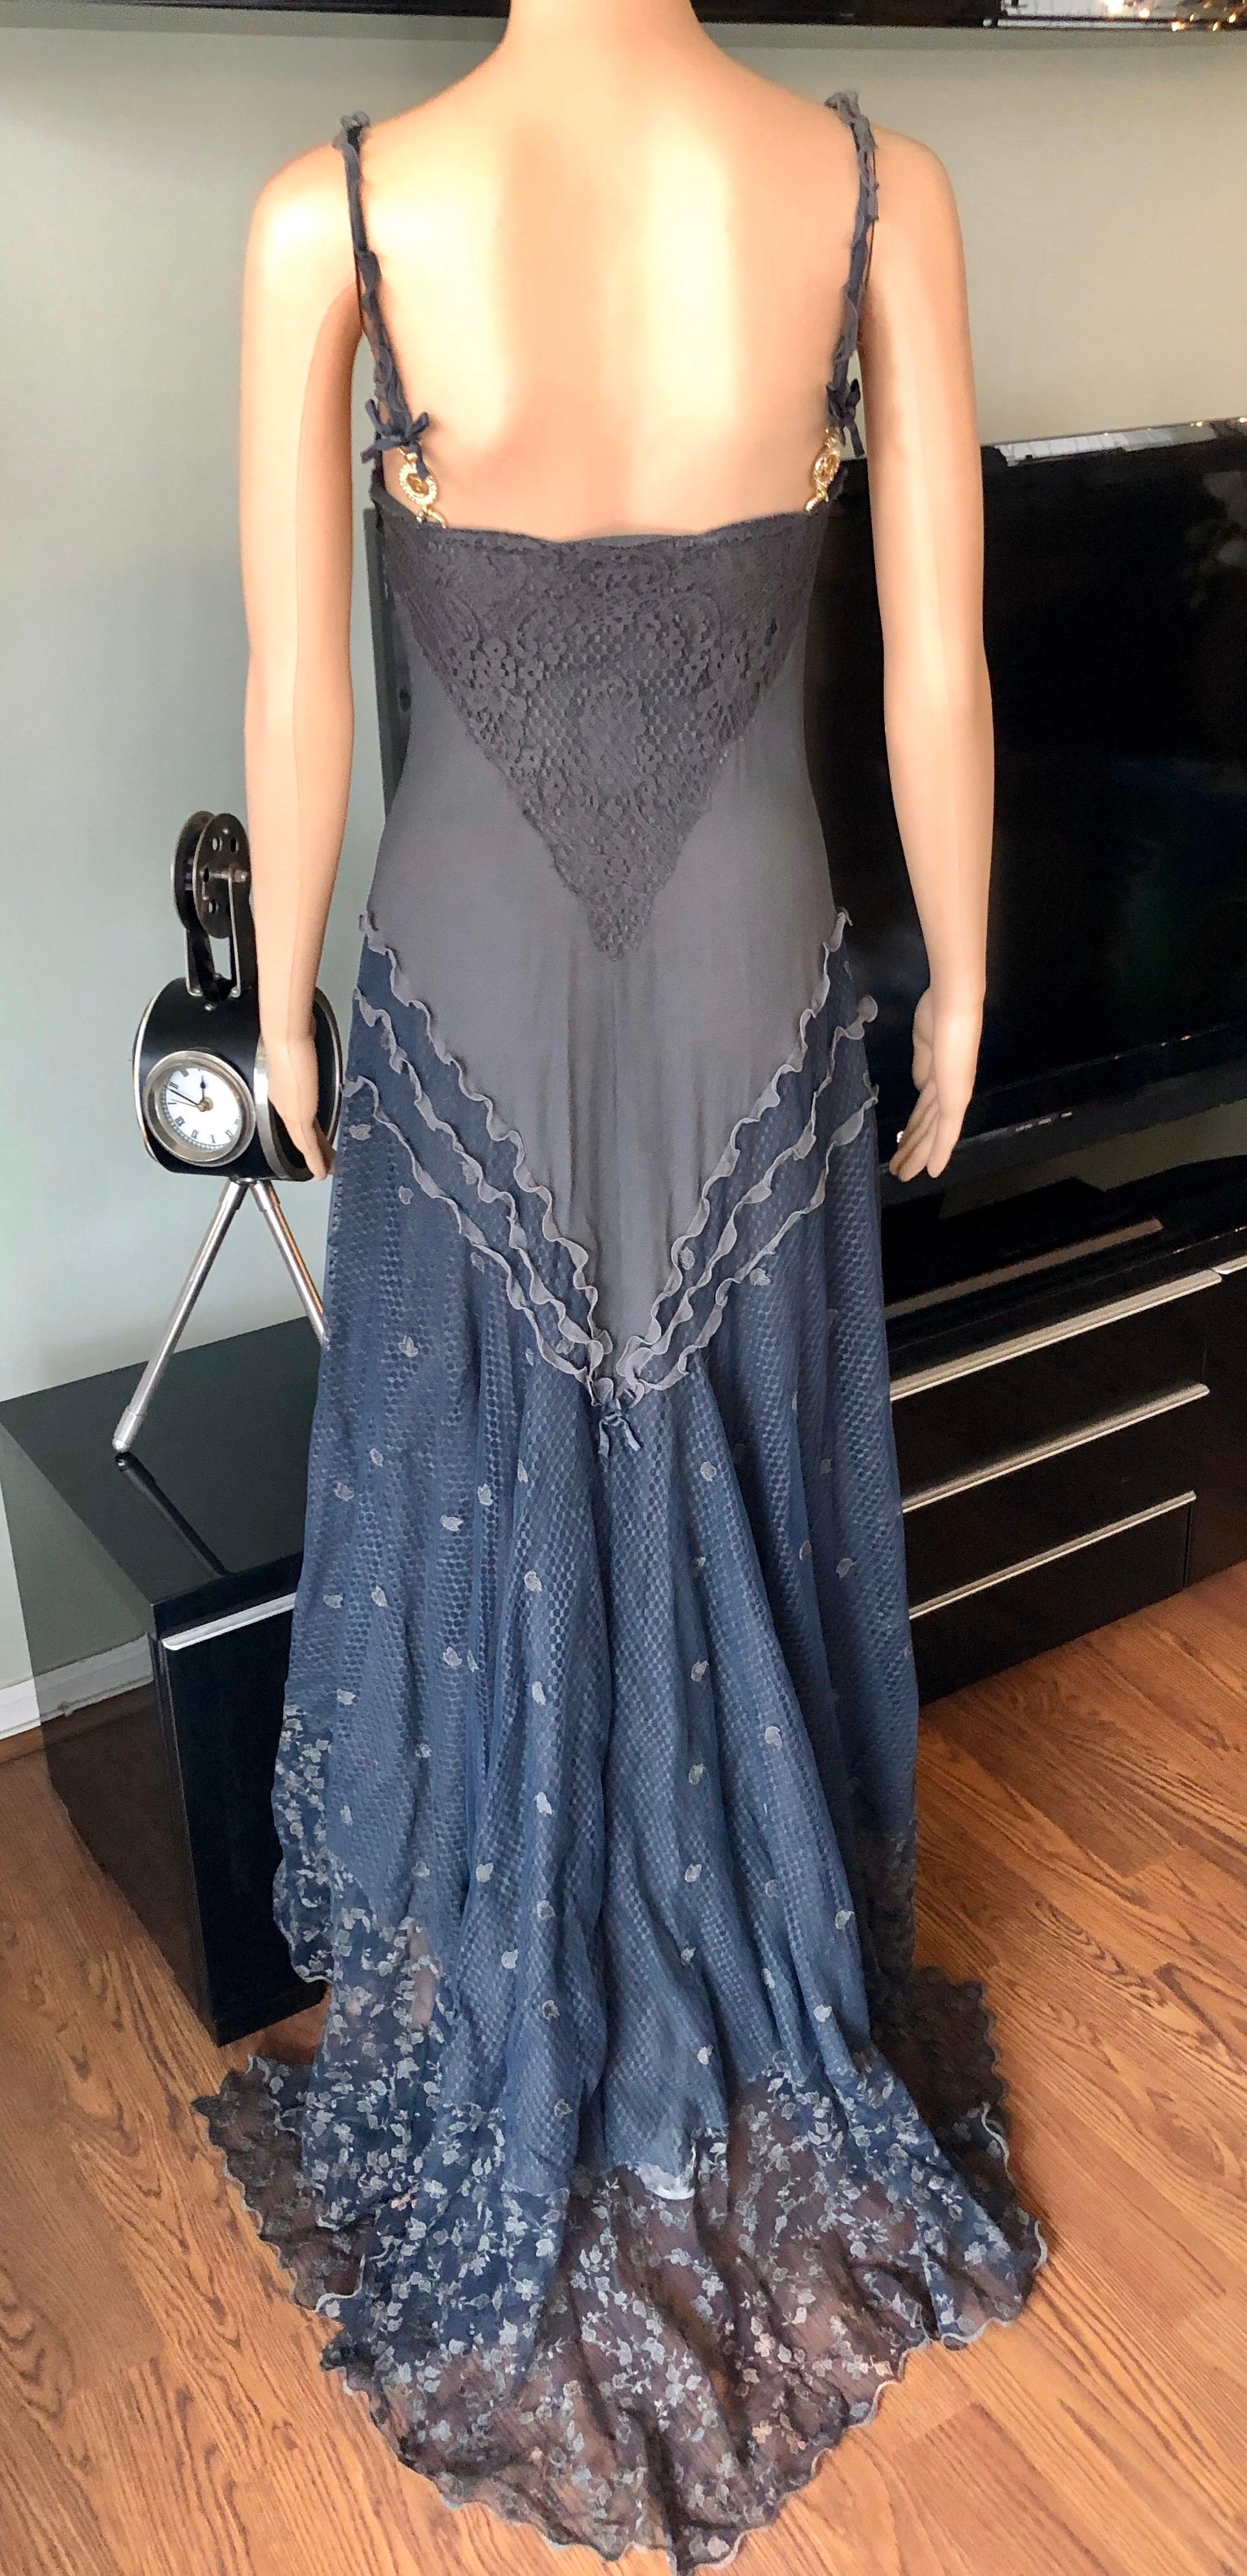 Gianni Versace S/S 1997 Runway Sheer Lace Panels Grey Evening Dress Gown For Sale 1